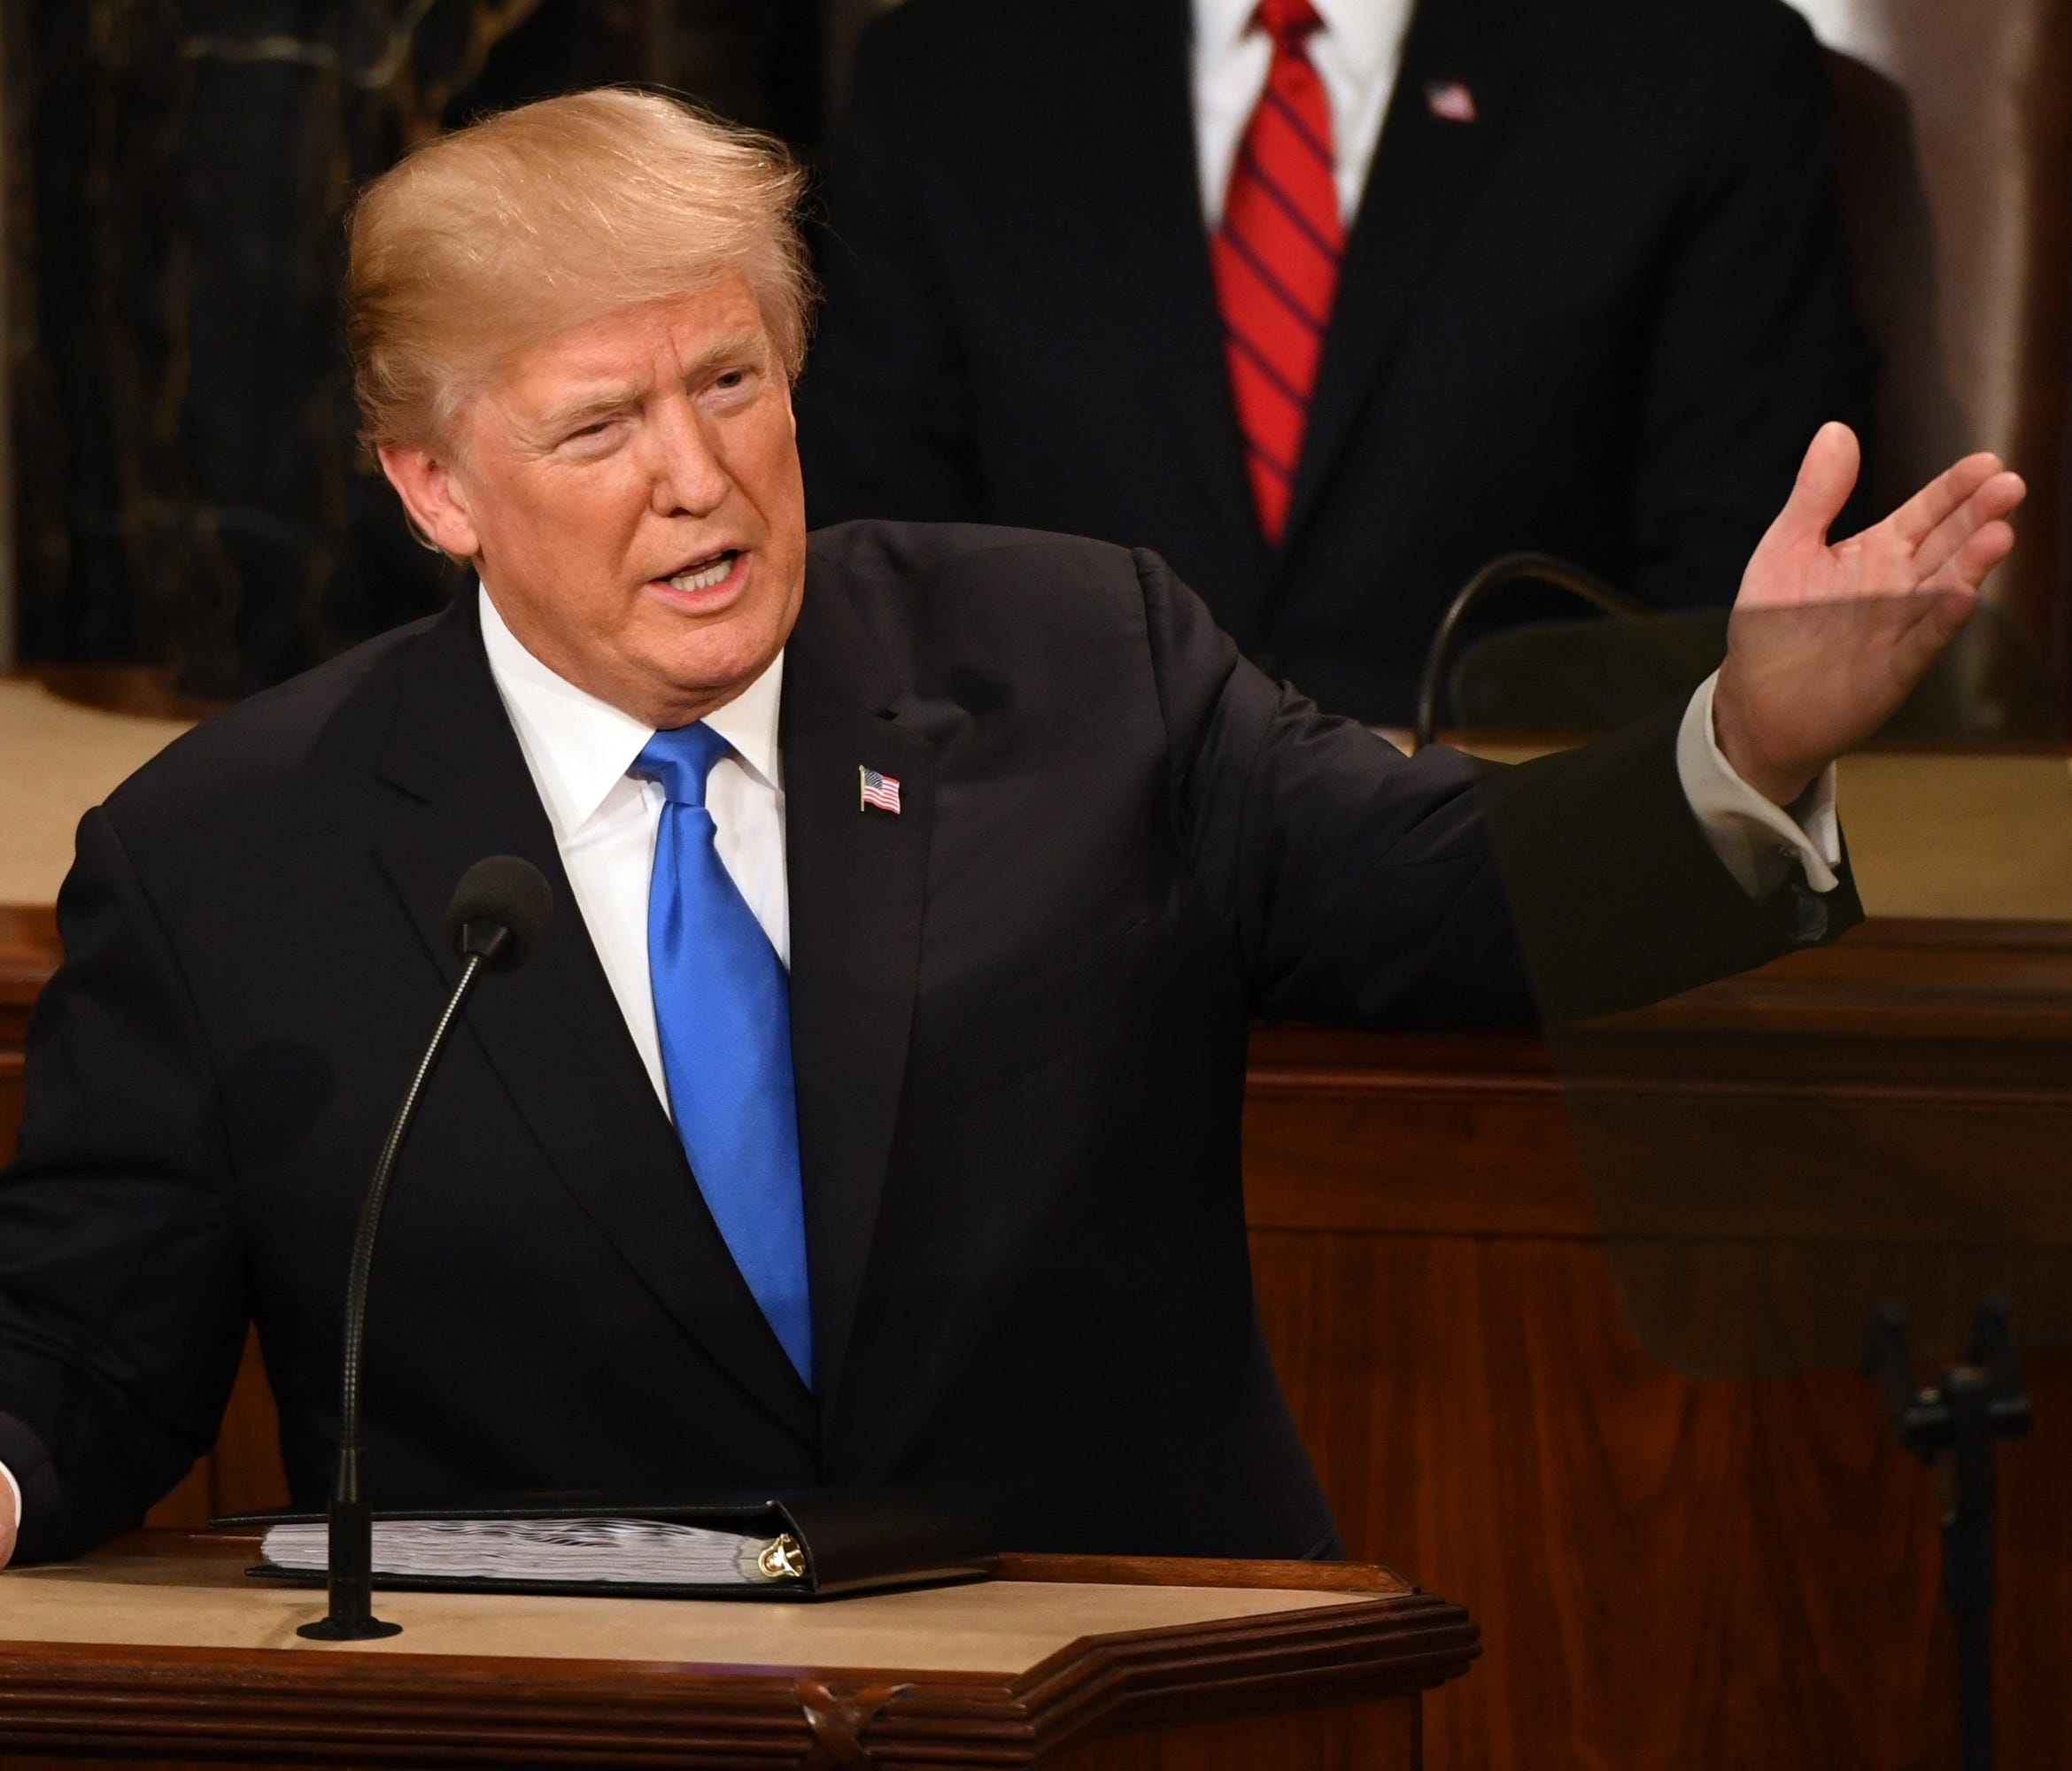 President Trump emphasized immigration and infrastructure in his State of the Union address Tuesday night.